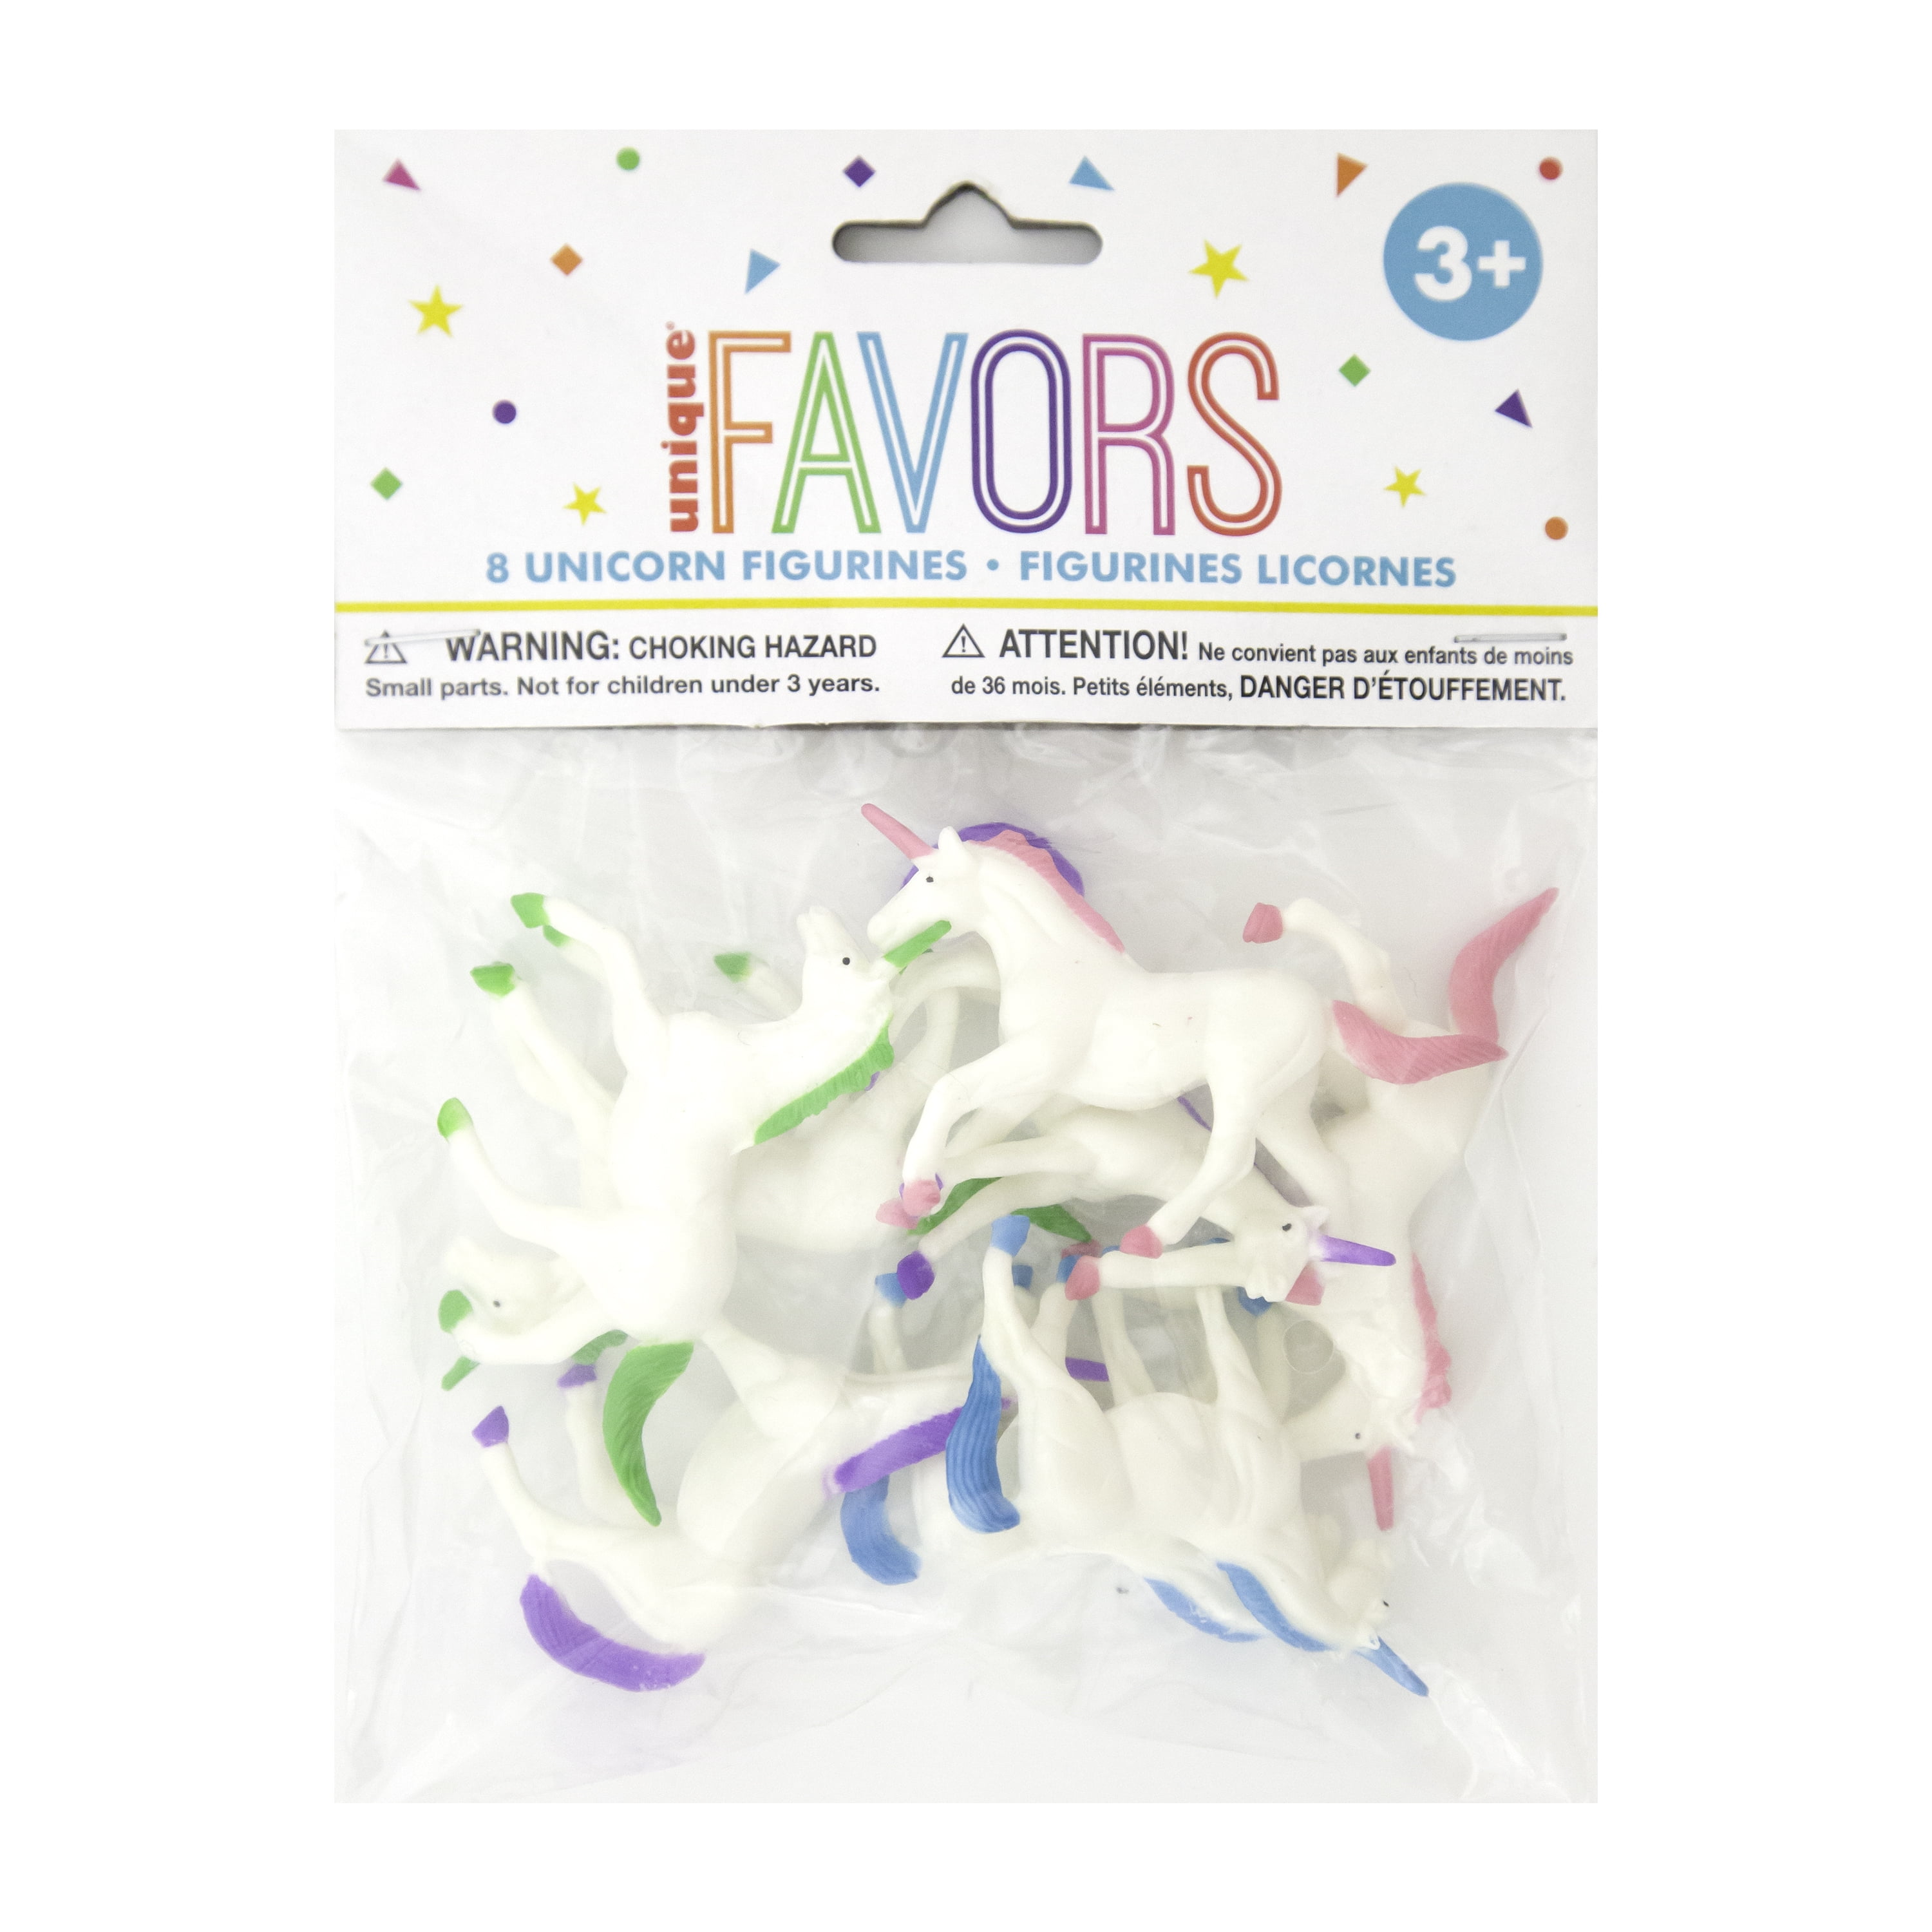 Party Favors for Kids, Unicorn Theme Party Favors, Unicorn Birthday Party  Supplies, Unicorn Rings Necklace Keychain